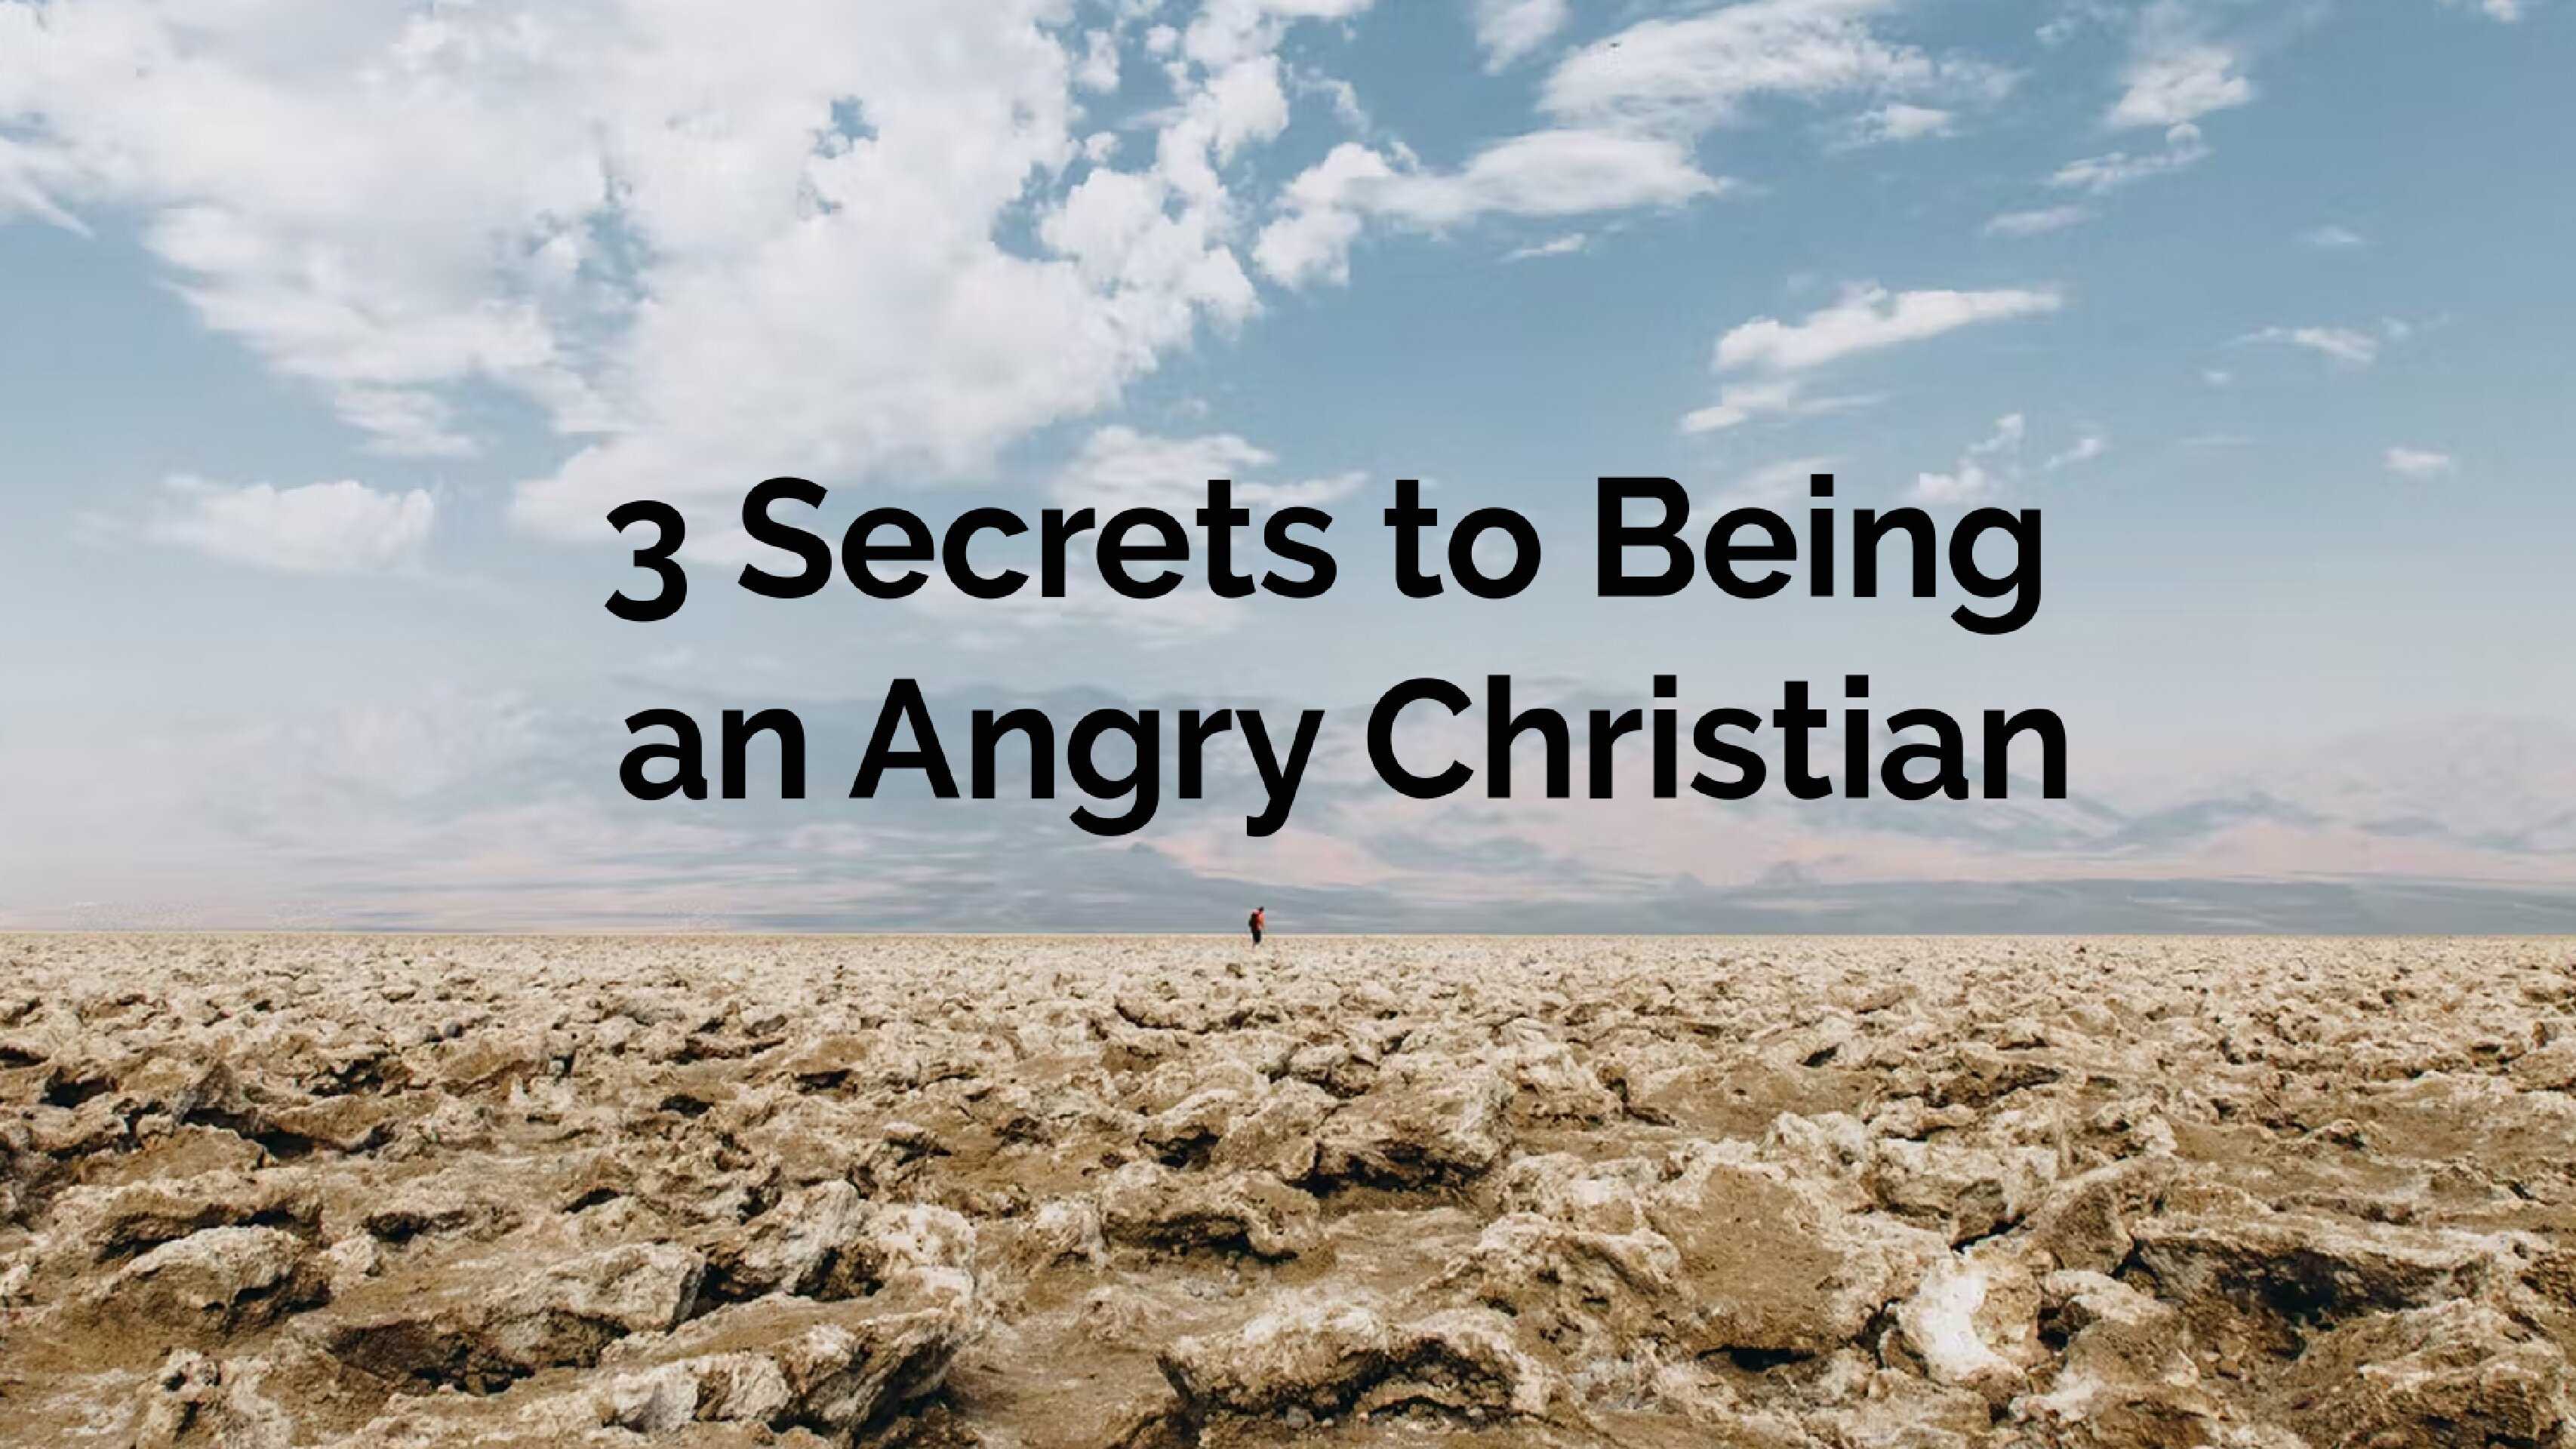 3 Secrets to Being an Angry Christian